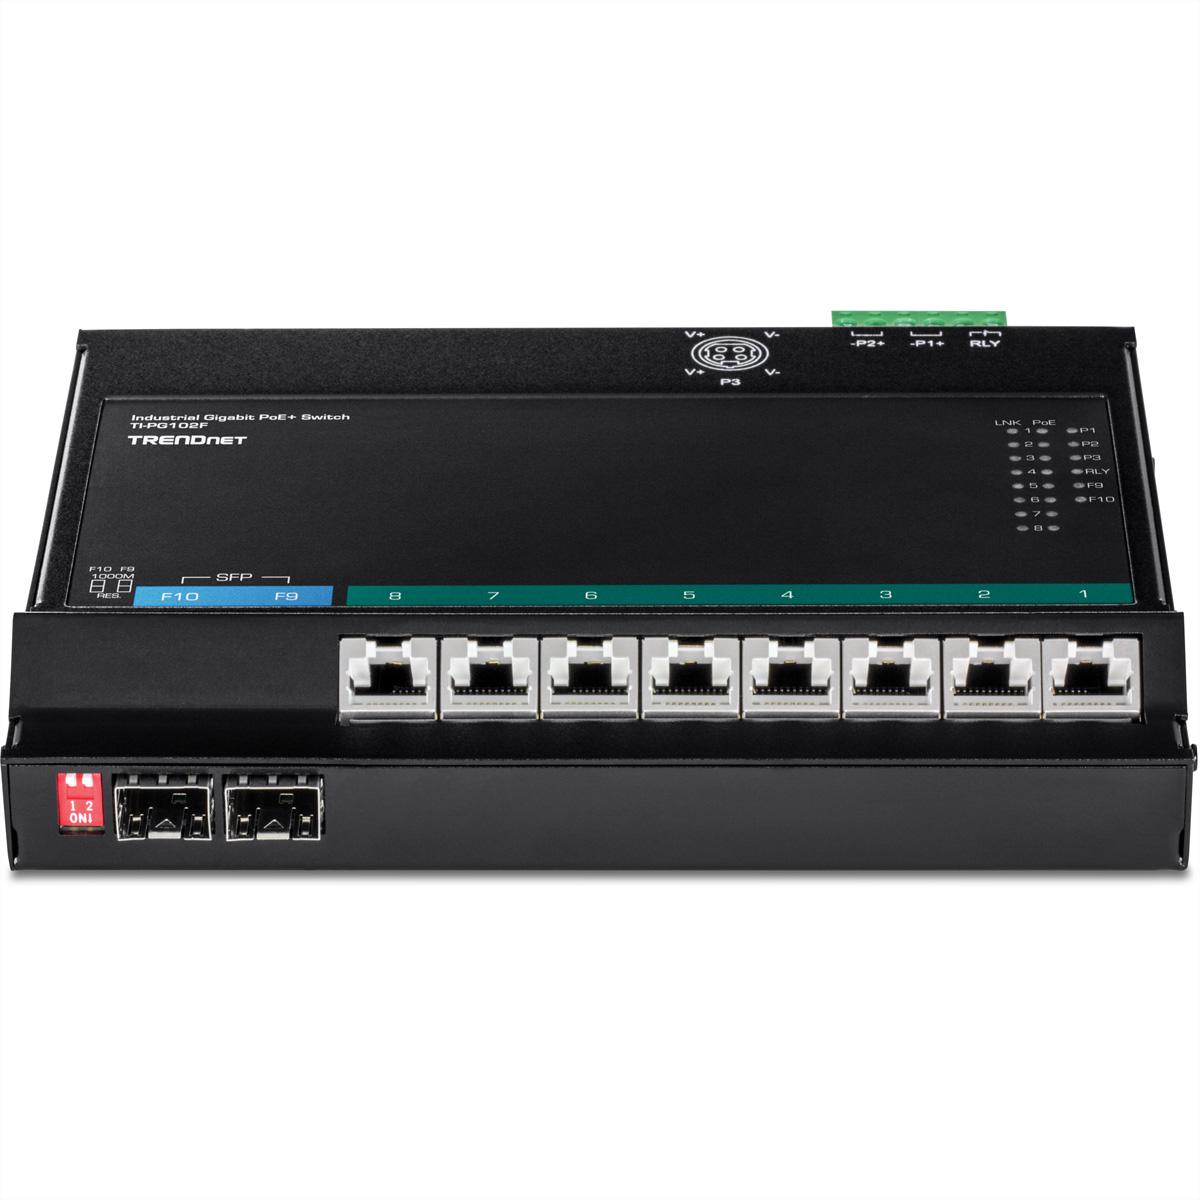 TRENDNET TI-PG102F PoE+ Switch Front Industrial Wall-Mount 10-Port Industrie Networking Access